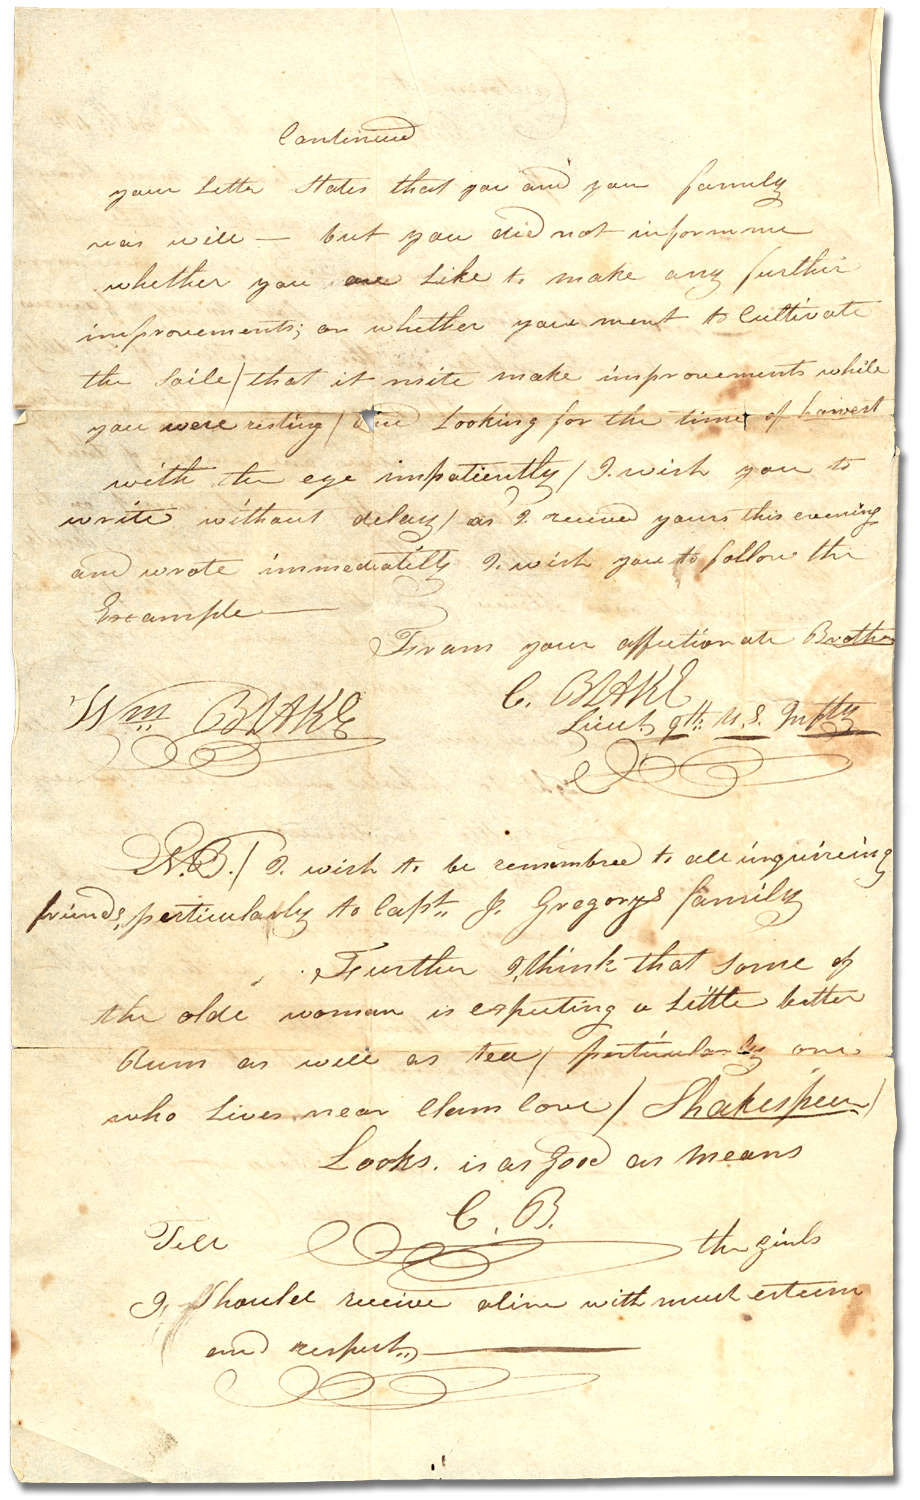 Letter from Lt. C. Blake, 9th U.S. Infantry to his brother William Blake, March 30, 1815, [page 2]